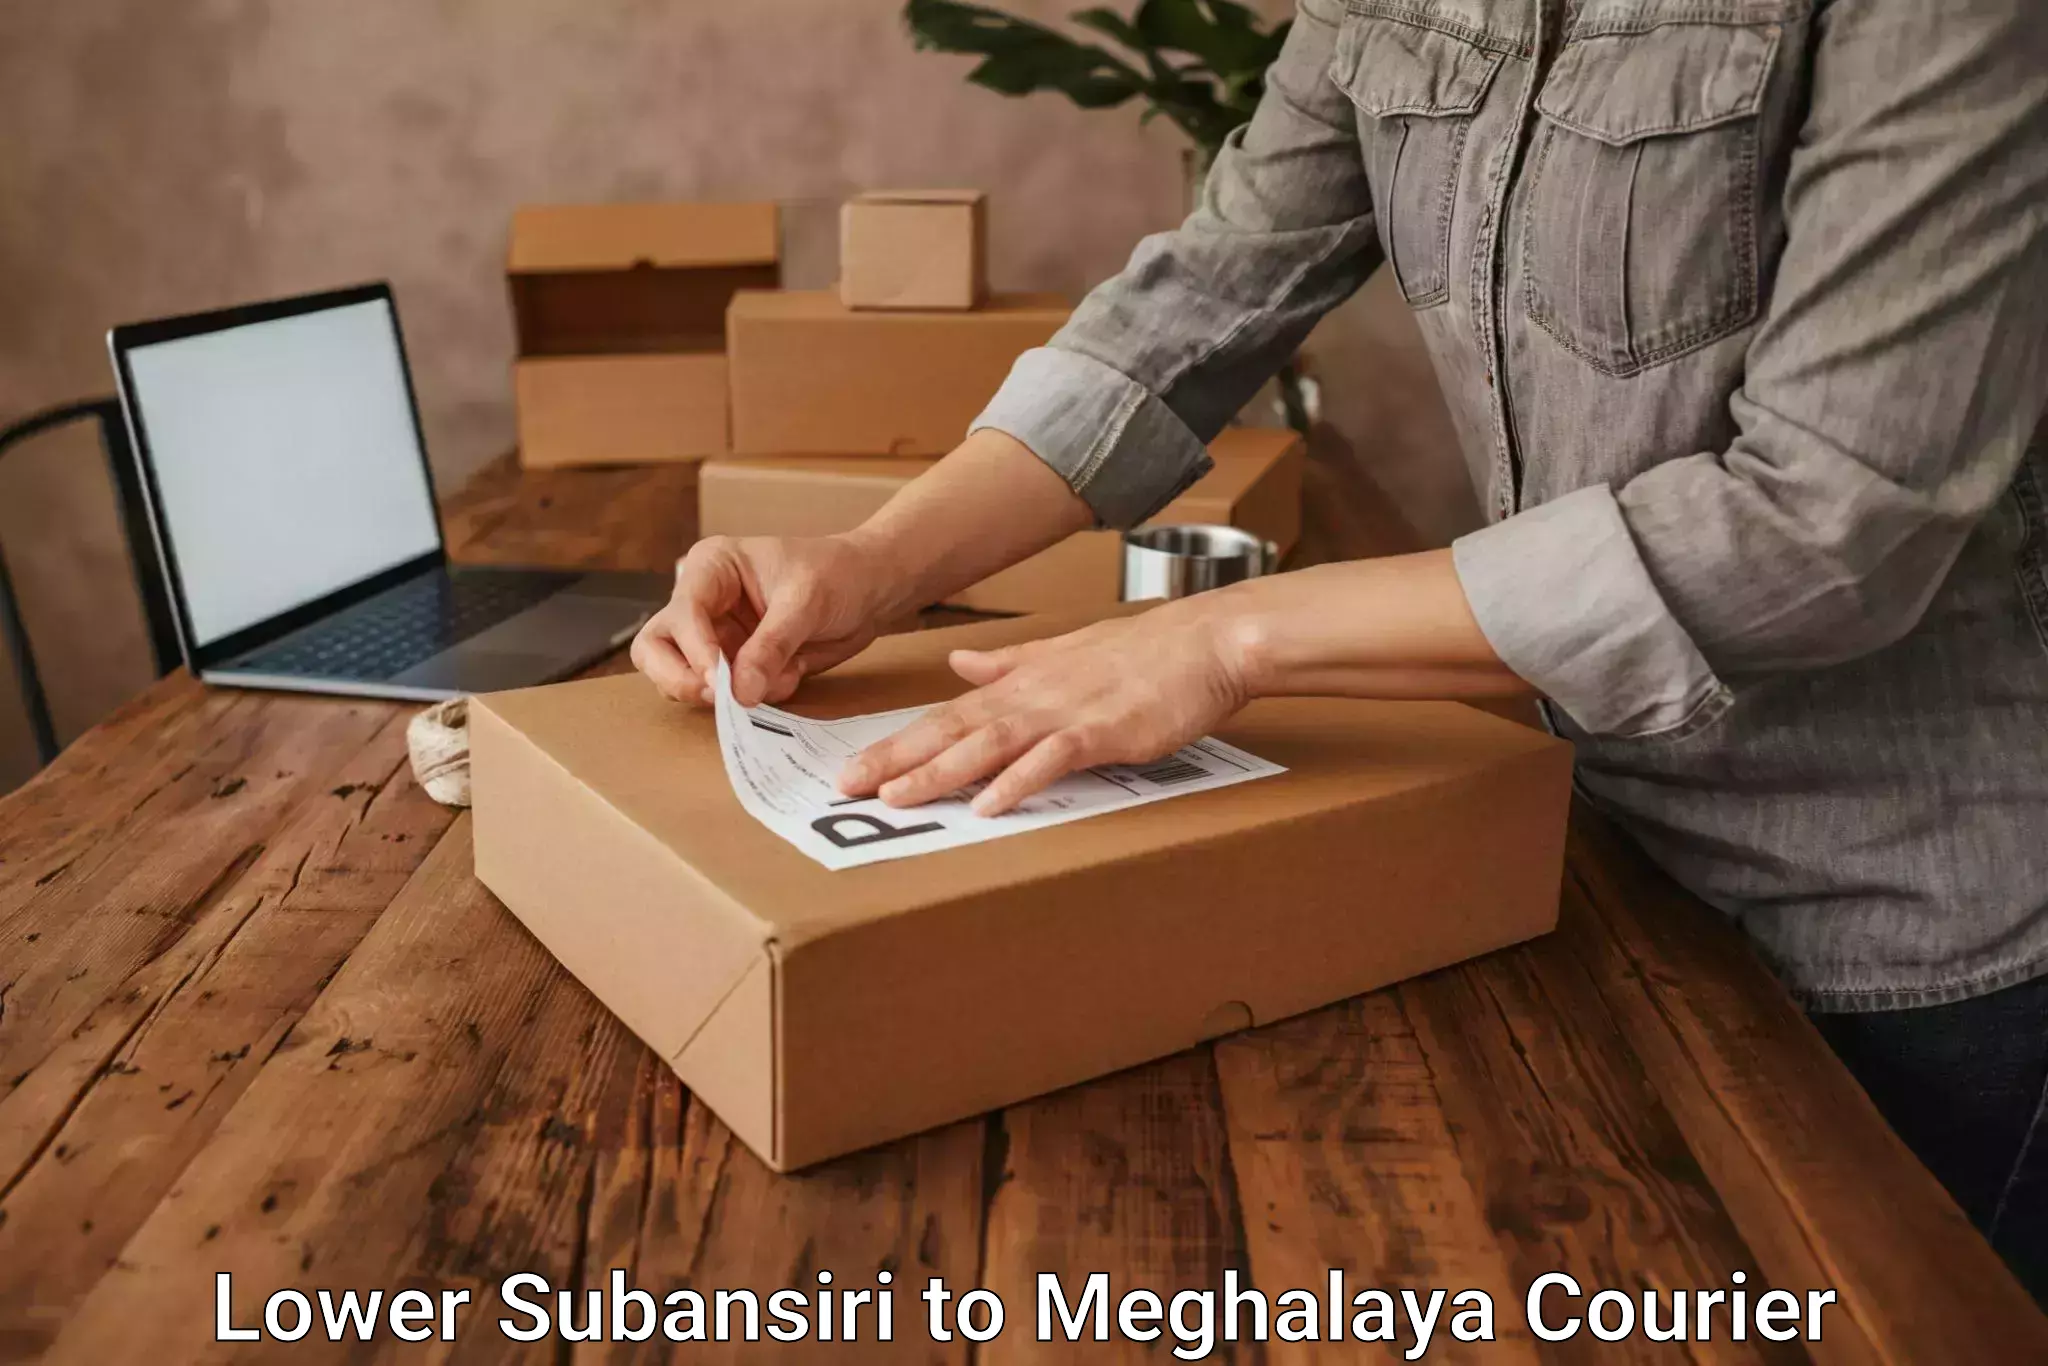 Courier services Lower Subansiri to Shillong